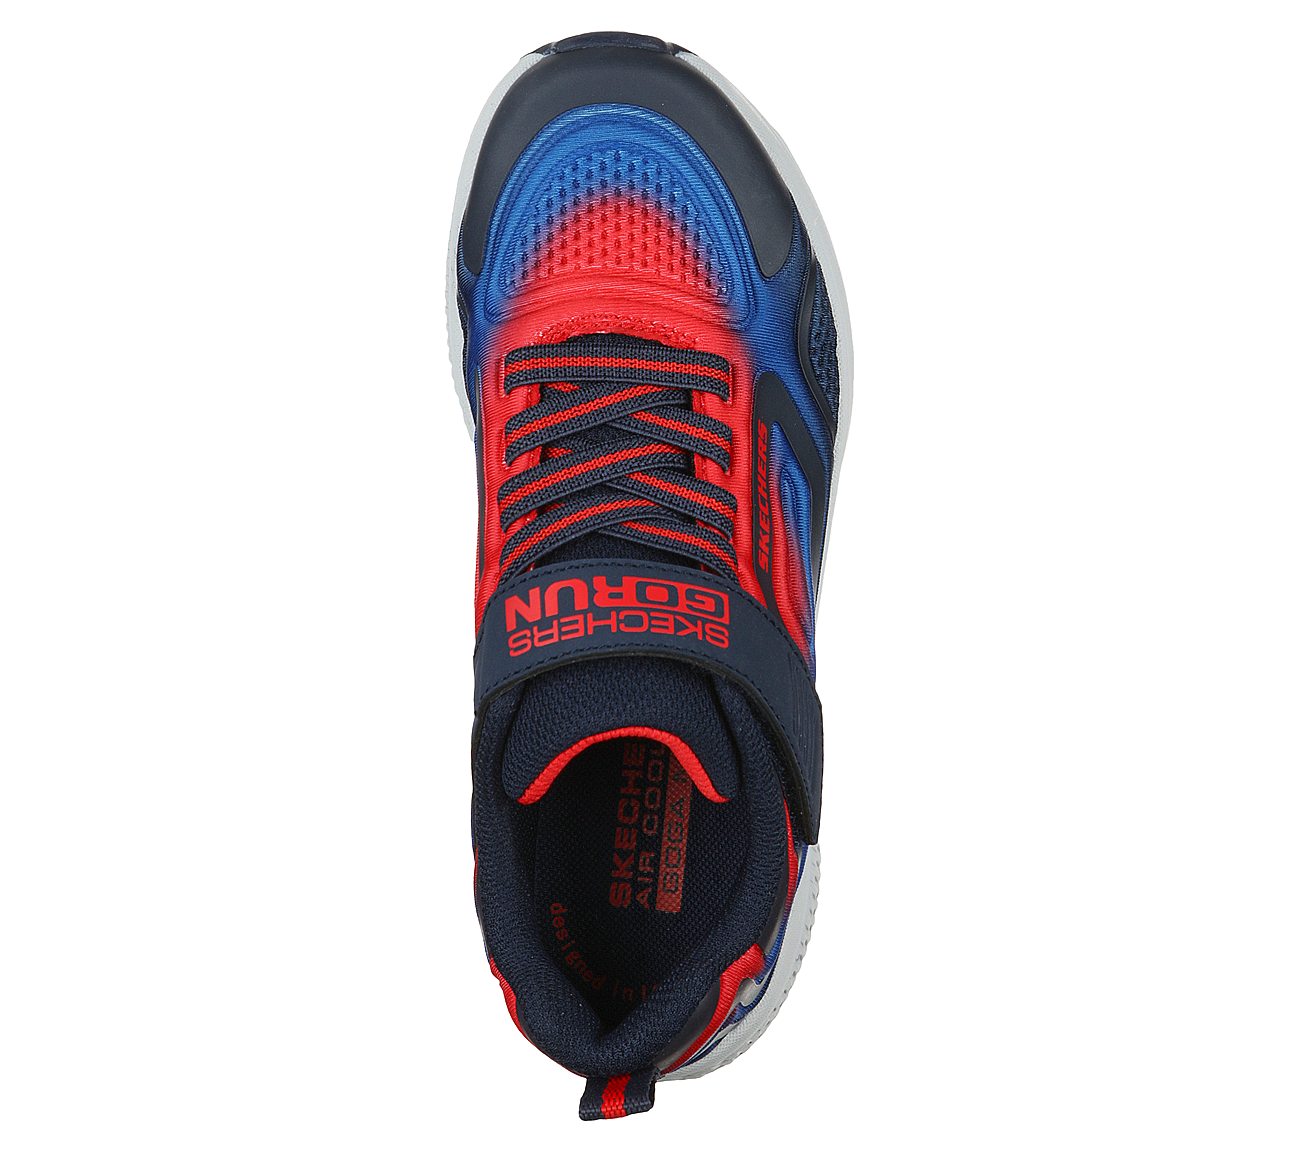 GO RUN CONSISTENT-SURGE SONIC, NAVY/RED Footwear Top View